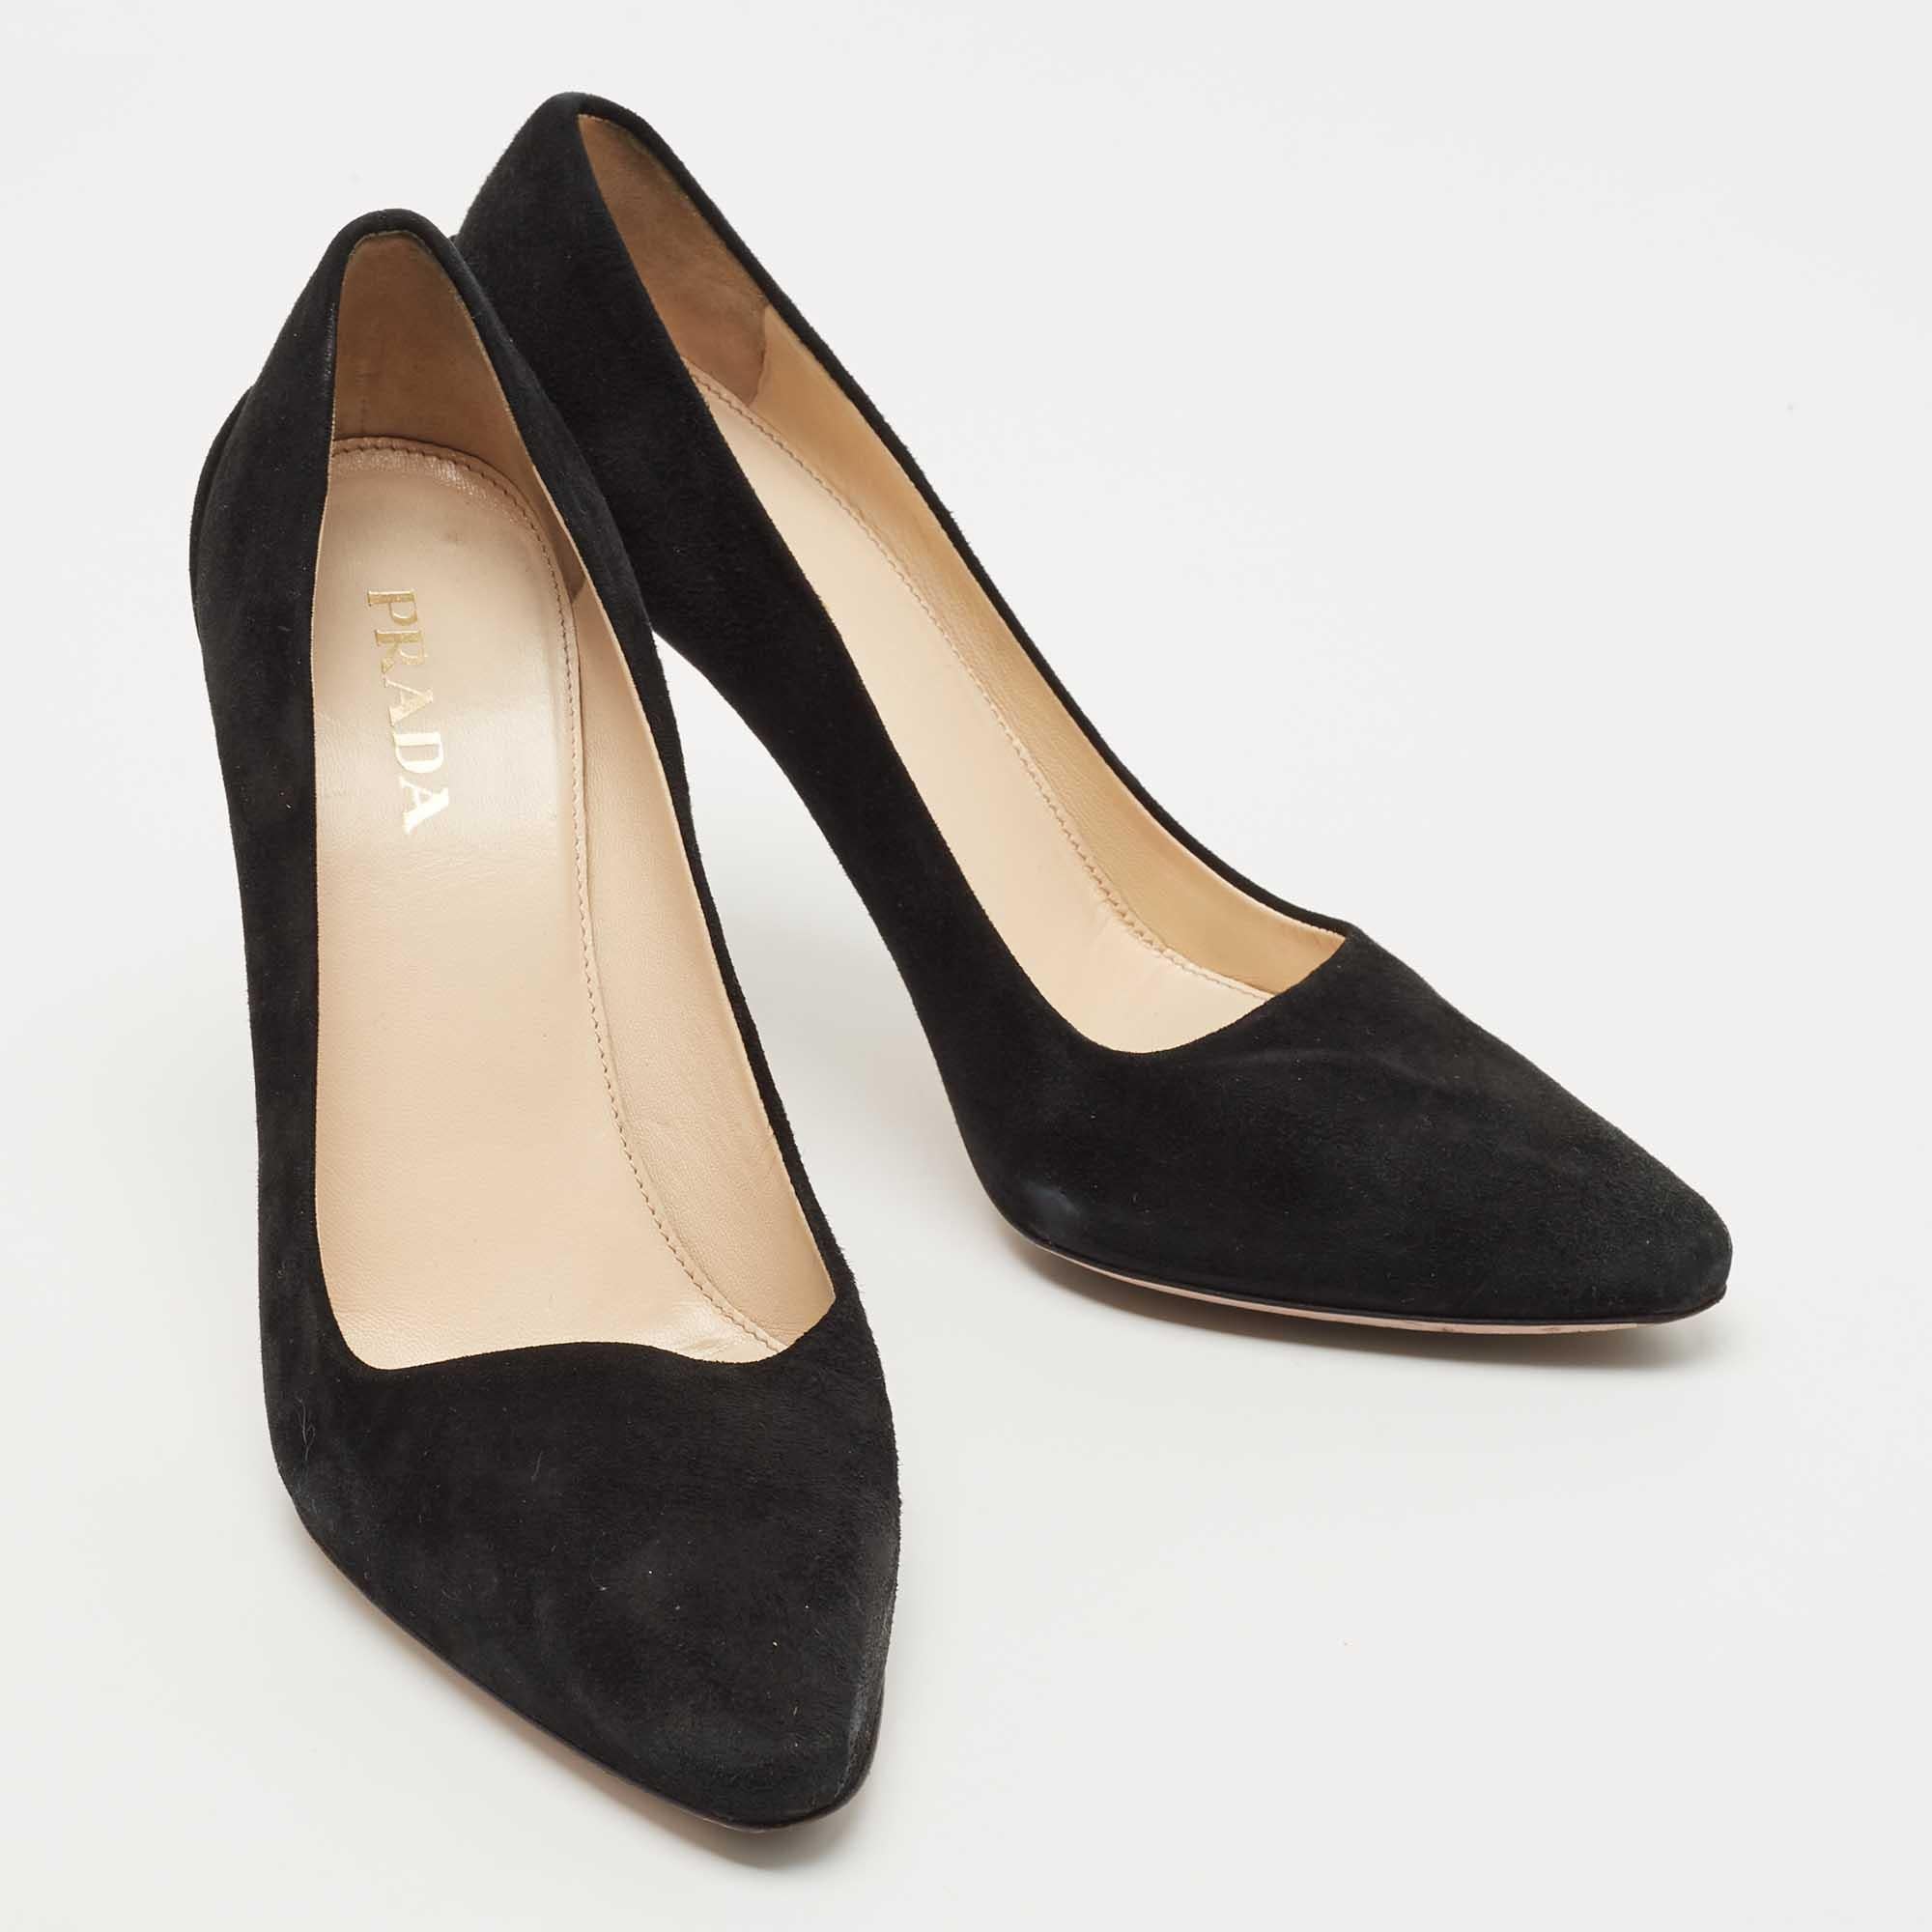 Prada Black Suede Pointed Toe Pumps Size 38.5 For Sale 3